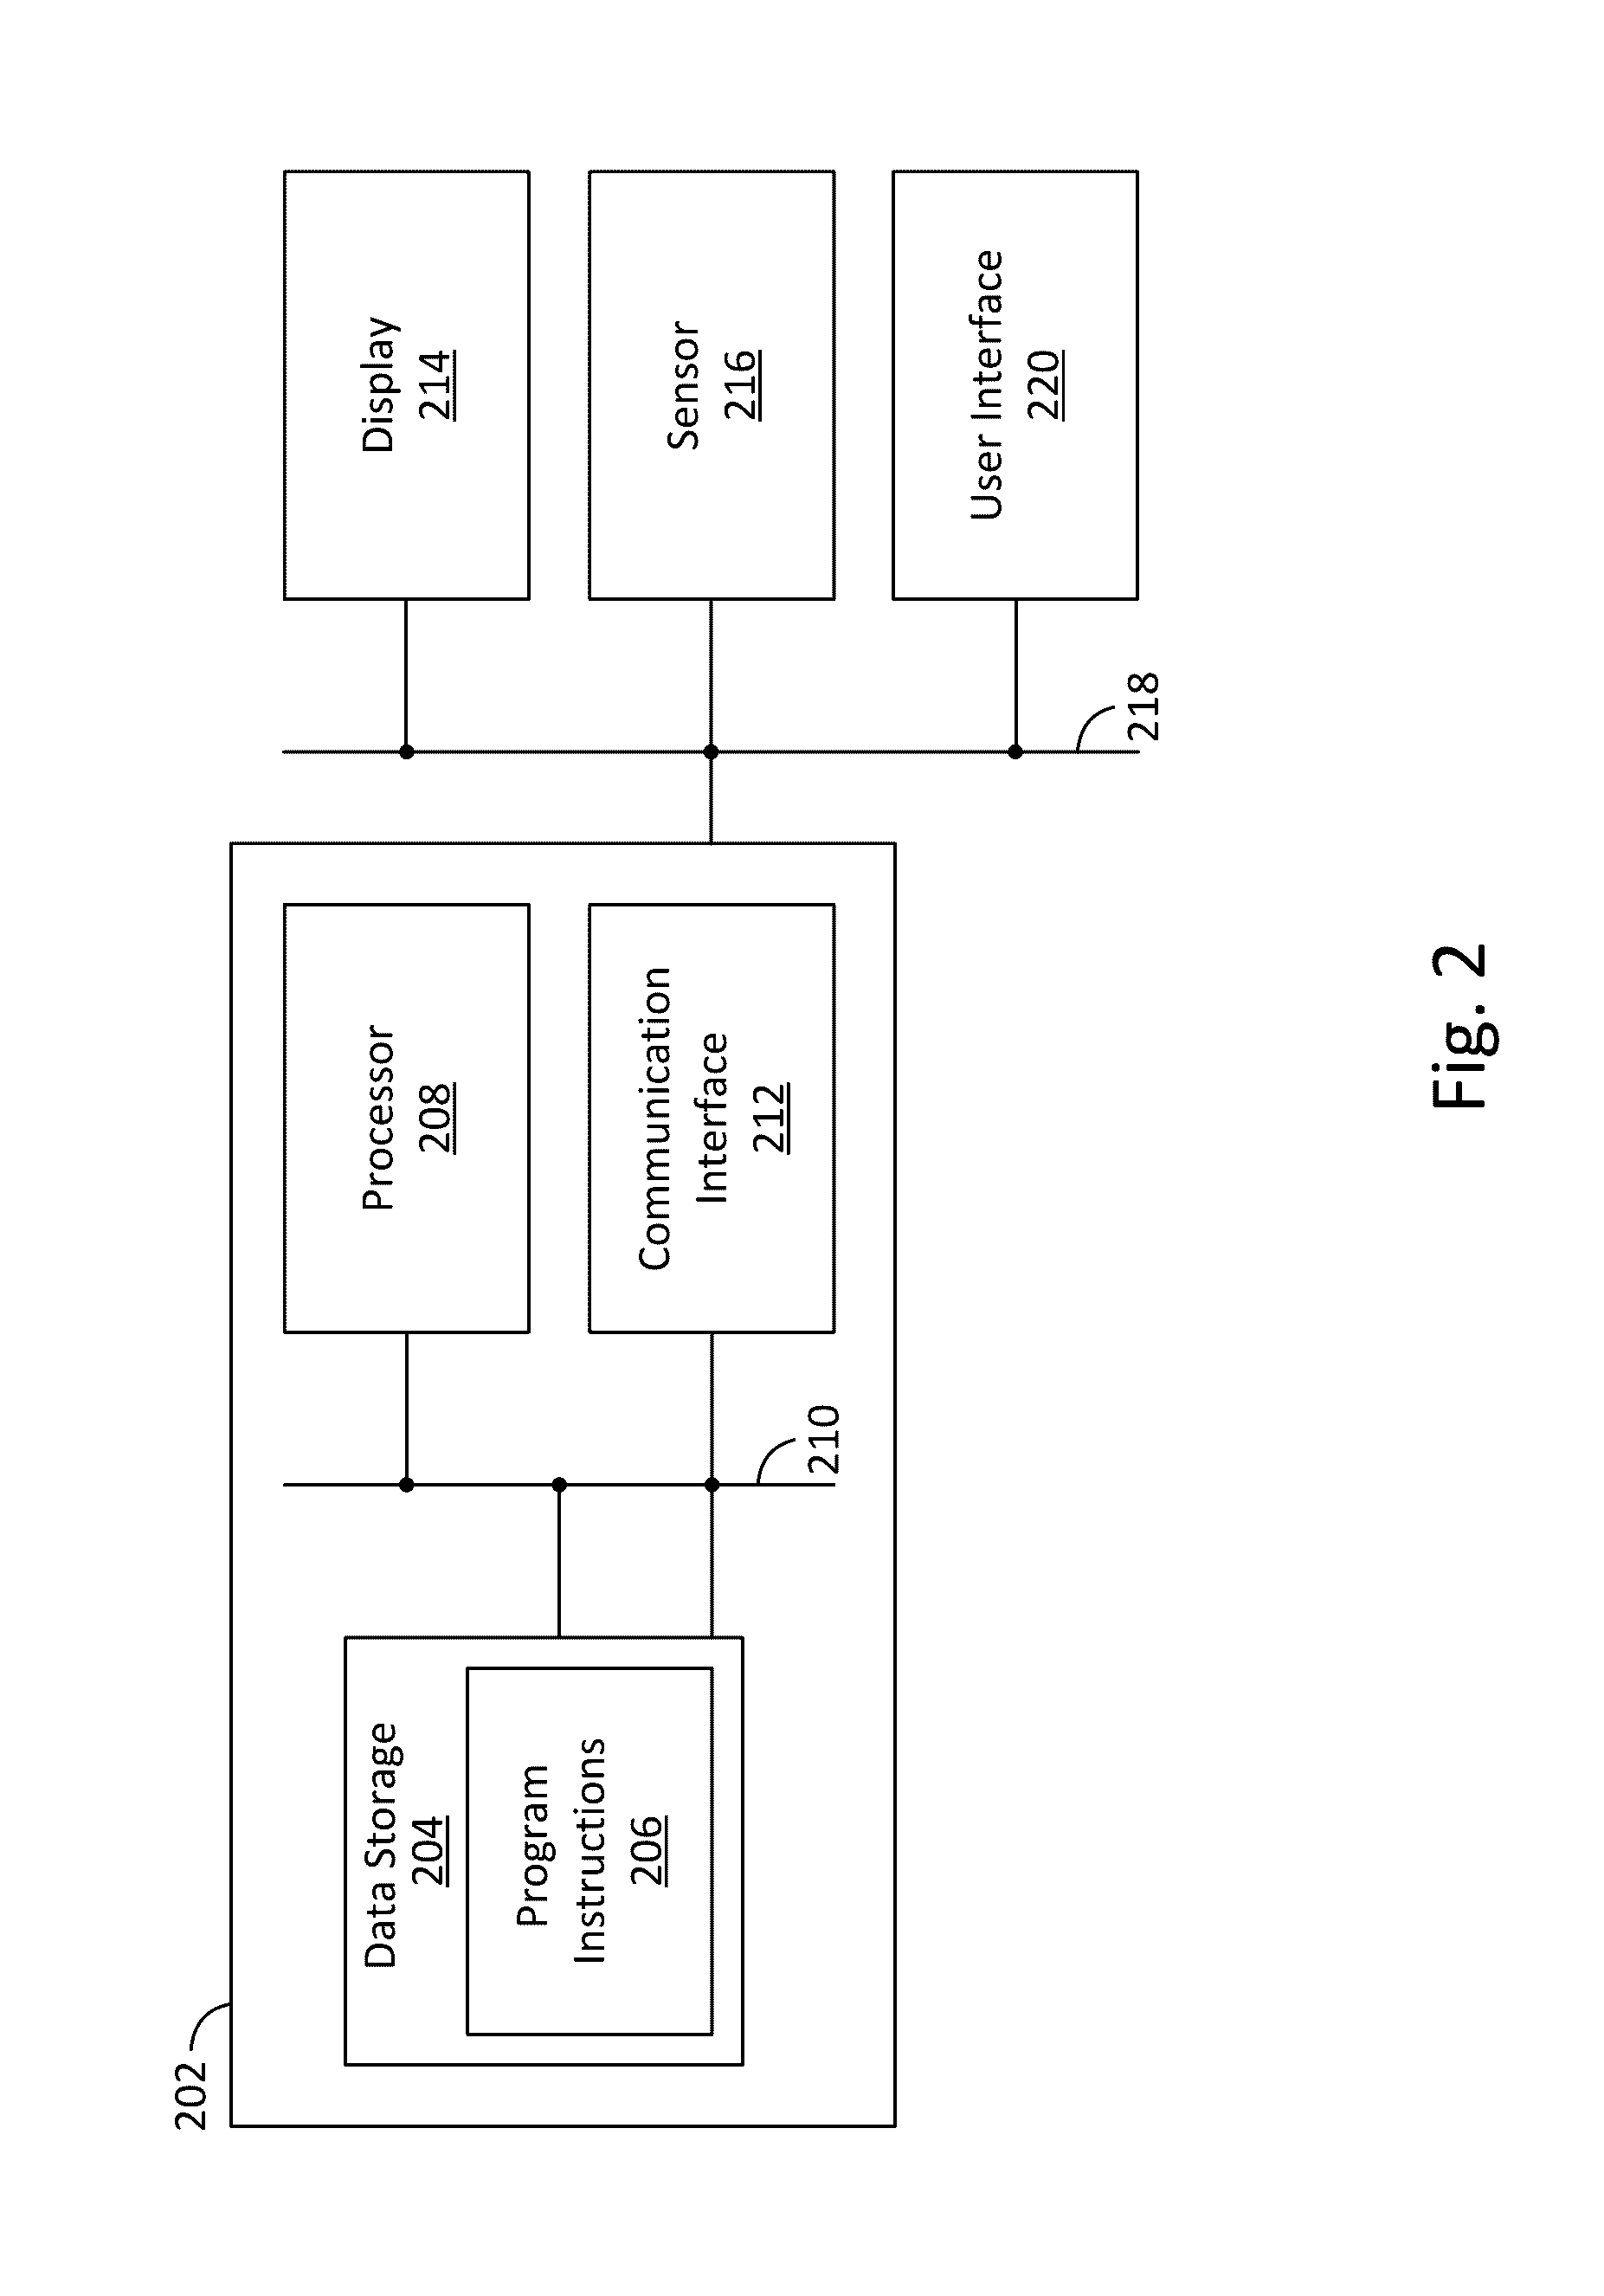 Methods and apparatus for learning sensor data patterns for gesture-based input